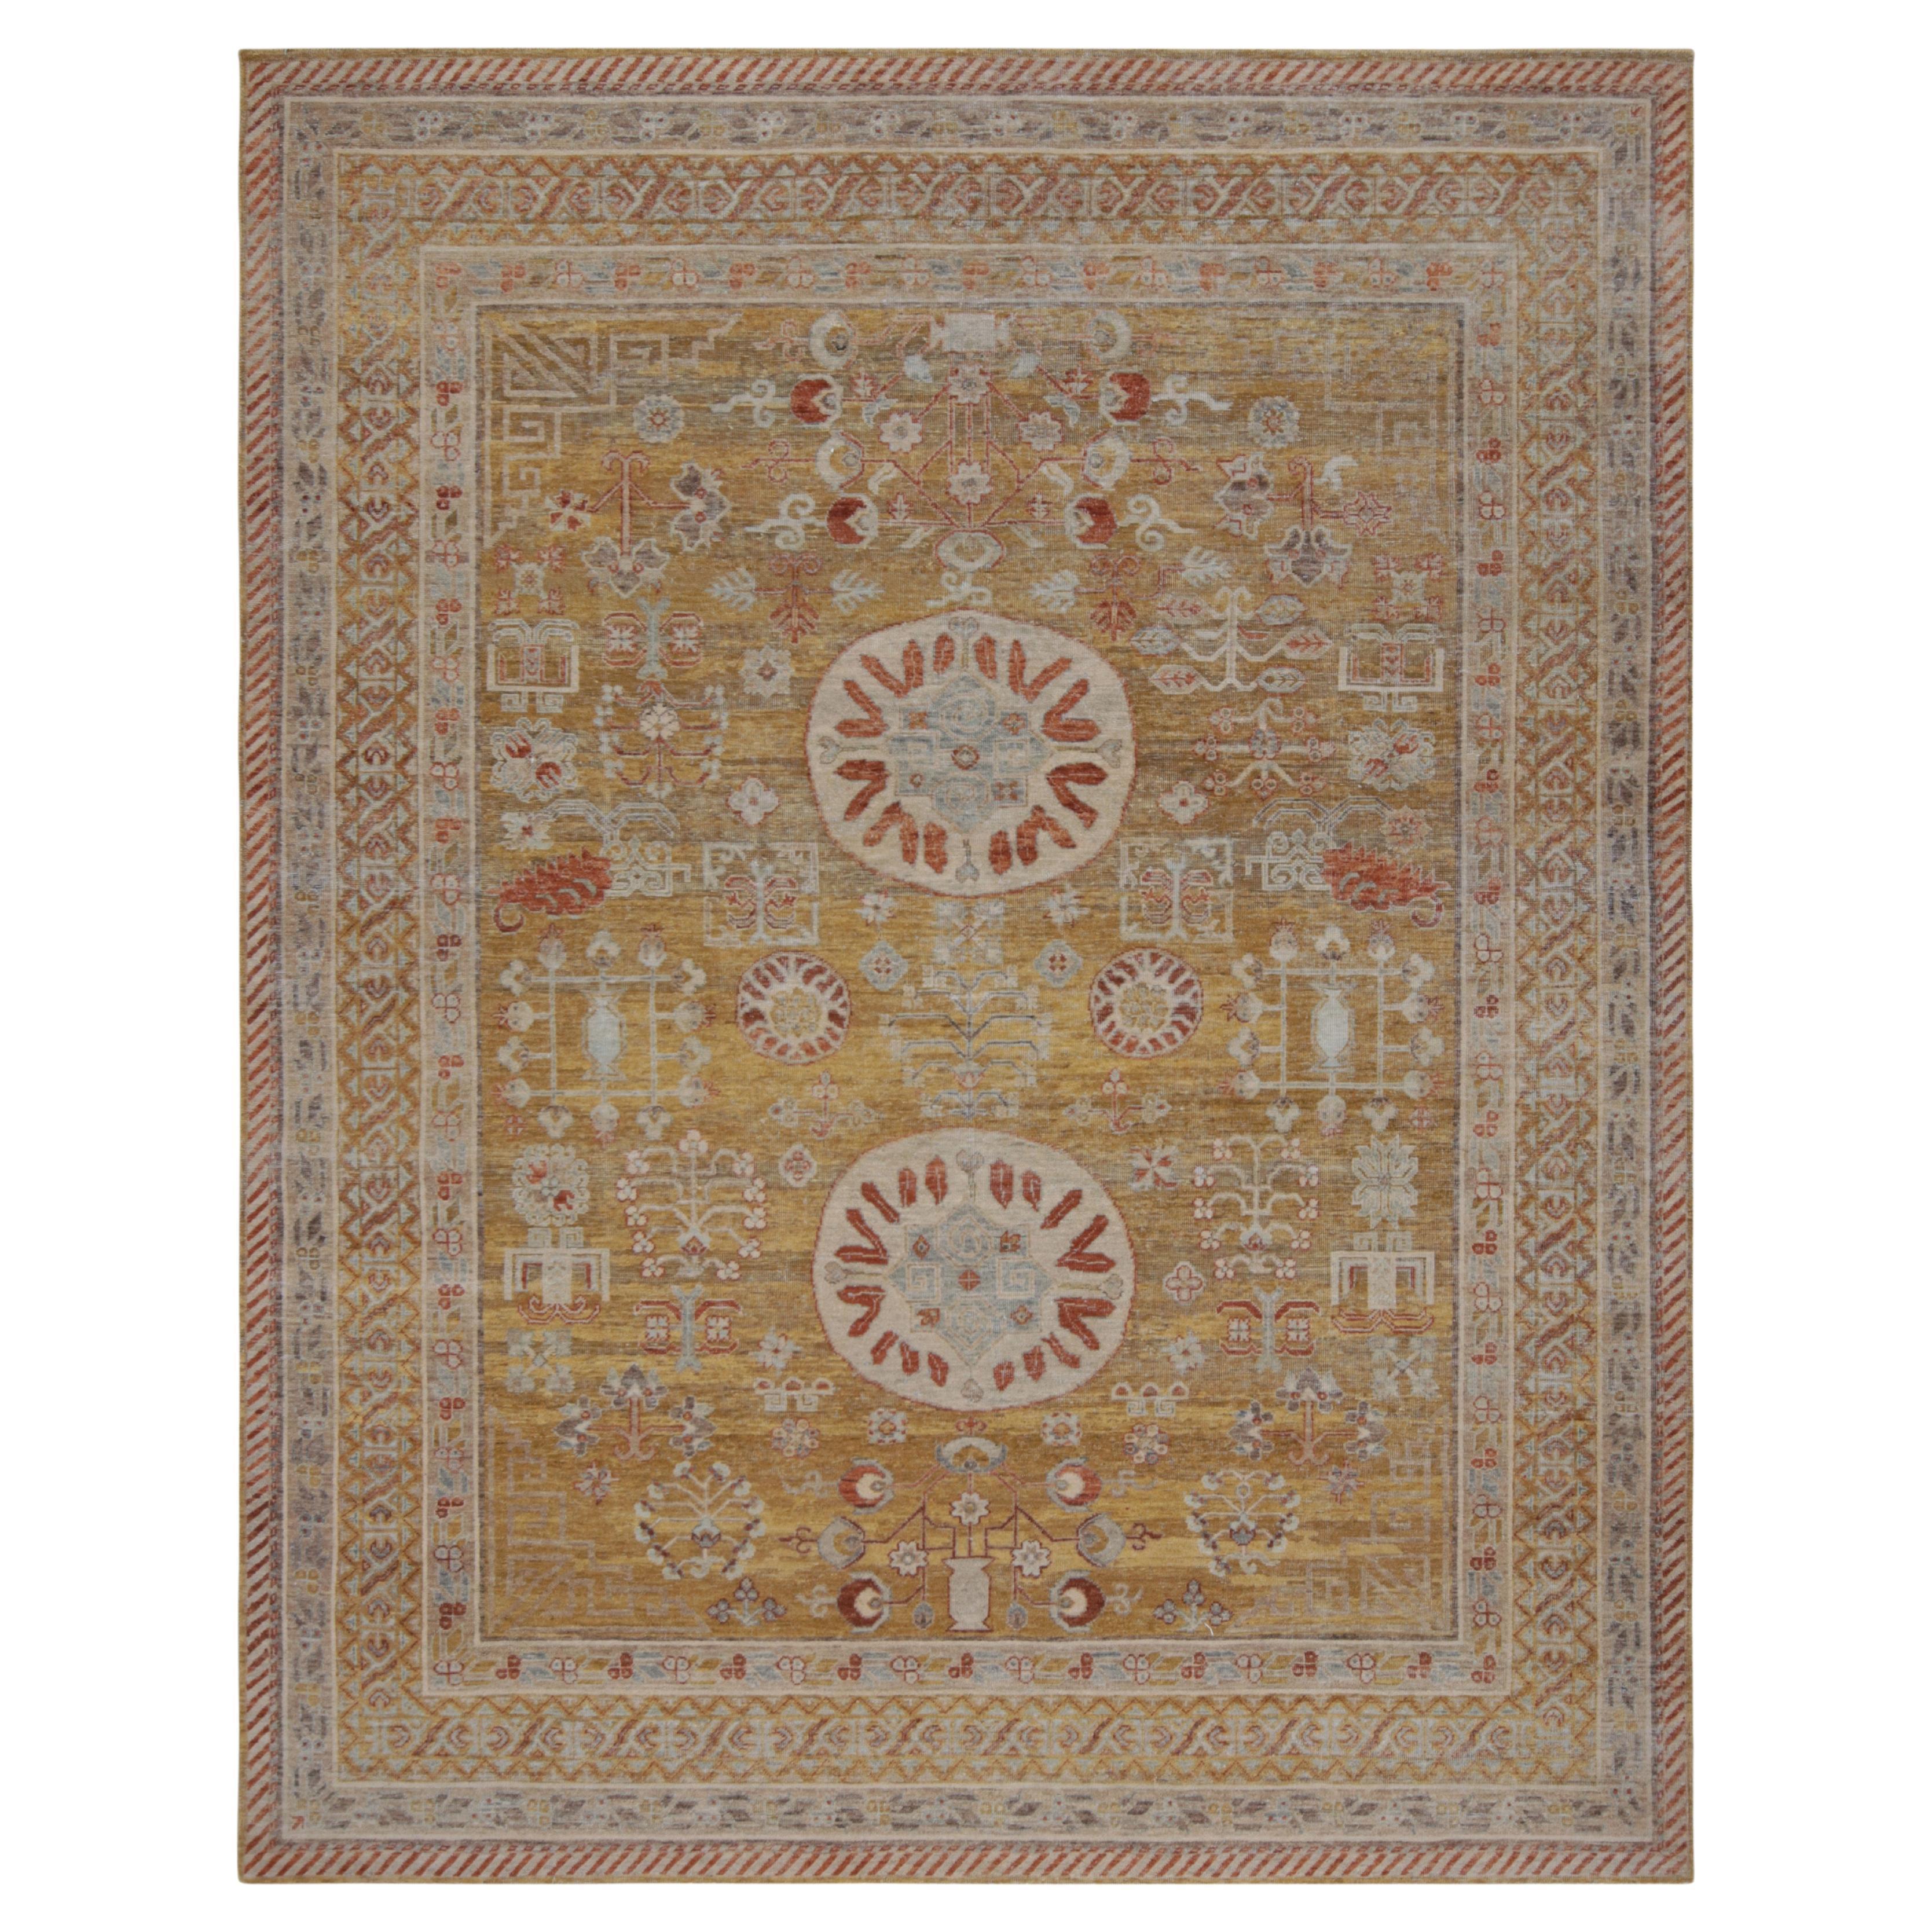 Rug & Kilim’s Khotan Rug in Gold and Red with Geometric Patterns